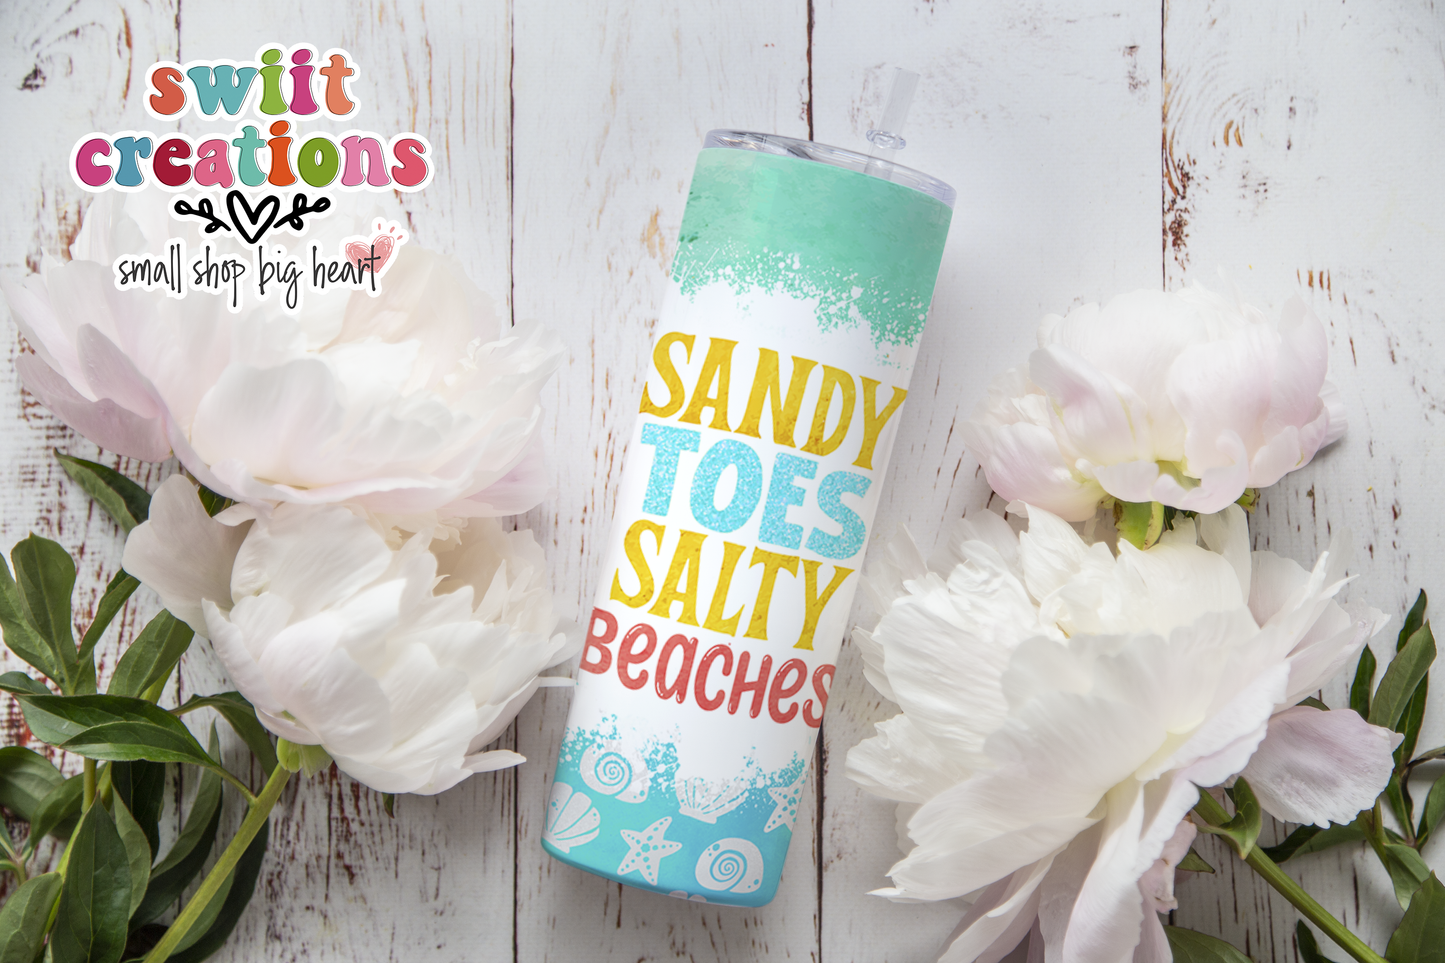 Sandy Toes Salty Beaches Tumbler (T335)